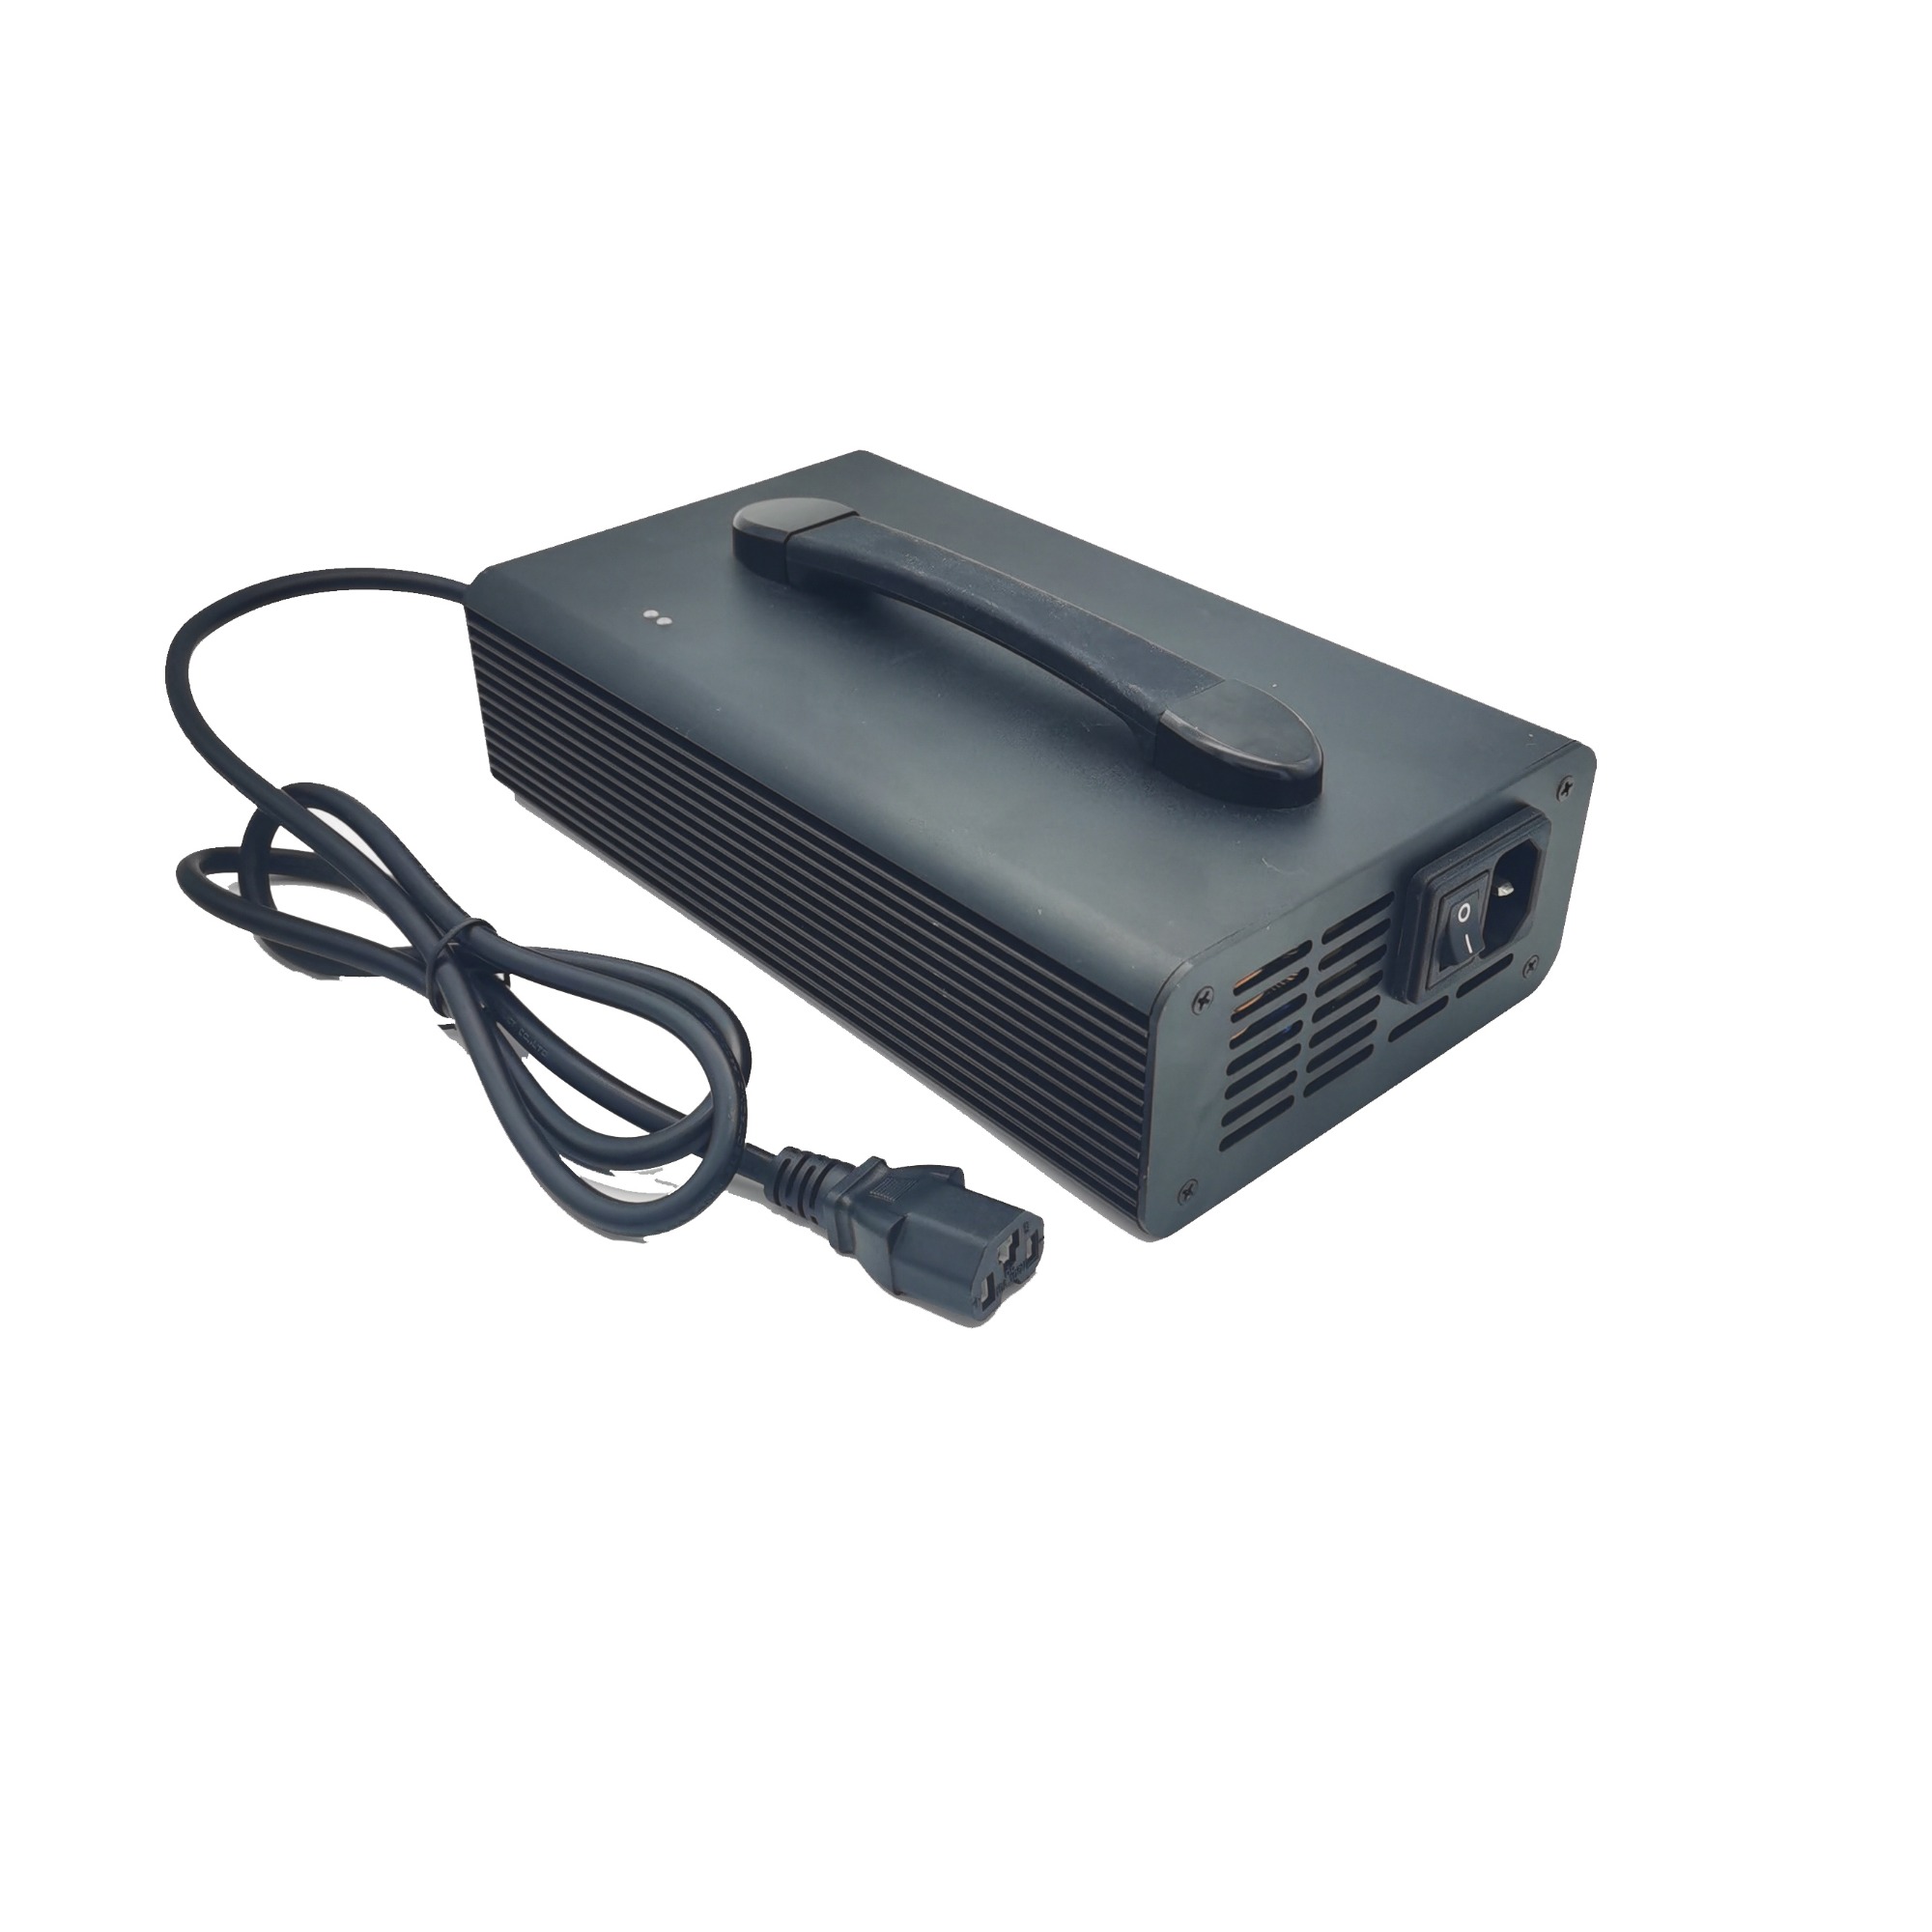 Smart design 29.4V 30A Lithium battery charger For 7S Li-ion Battery charging